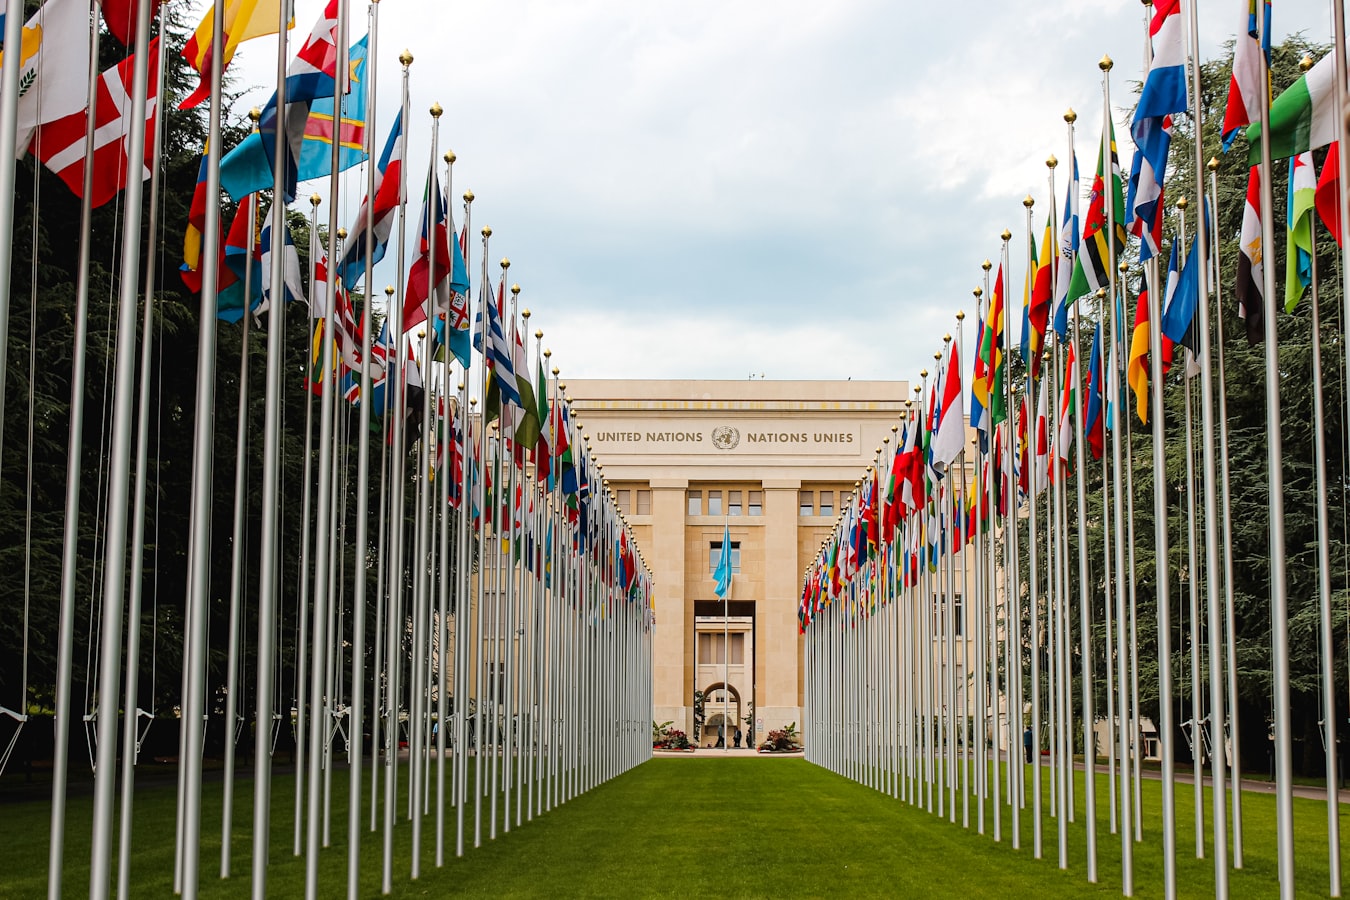 Walkway lined with flags to united nations building